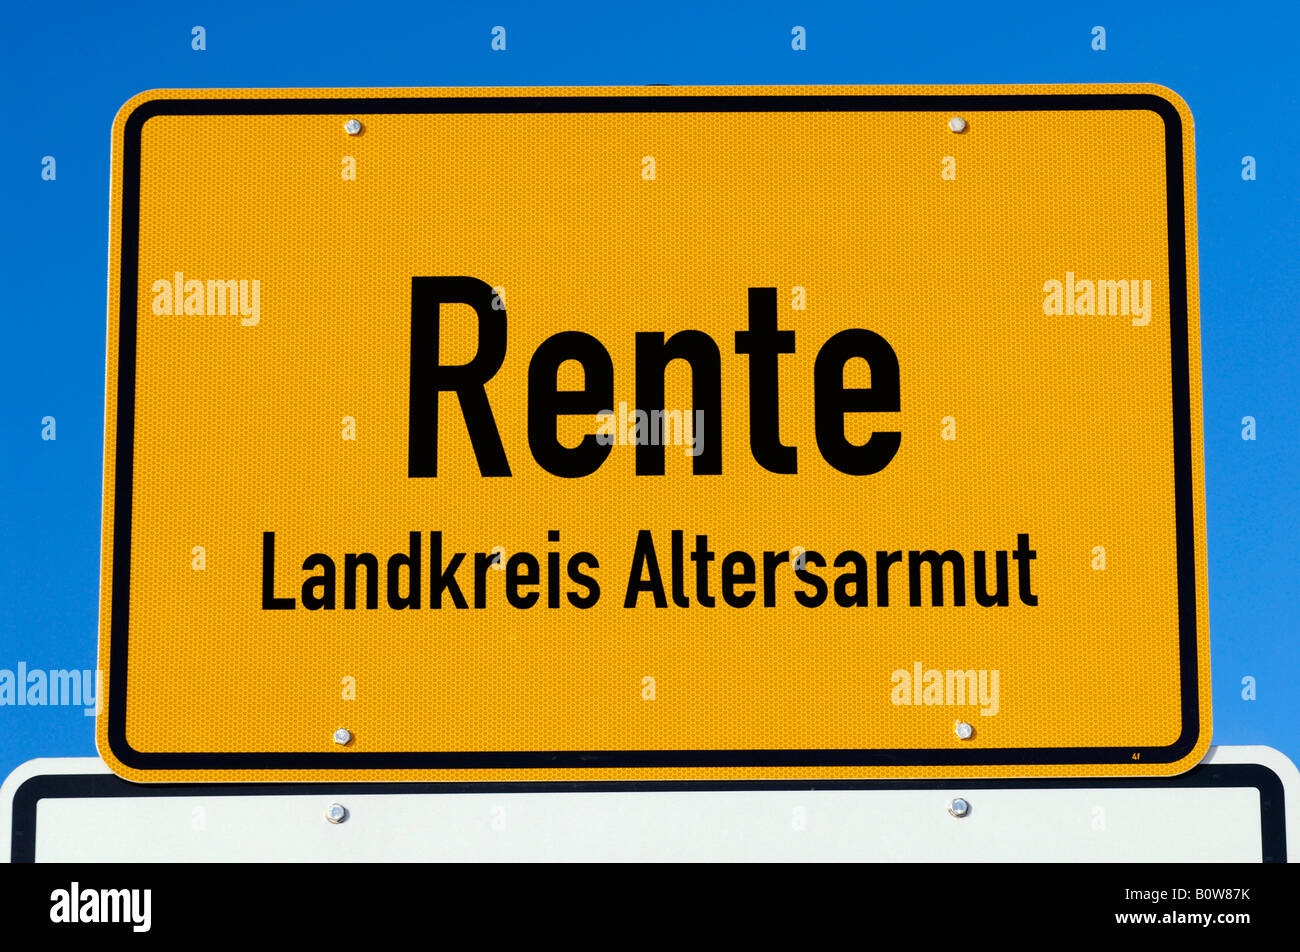 Rente, Altersarmut (Ger. for old-age pension and poverty) Stock Photo